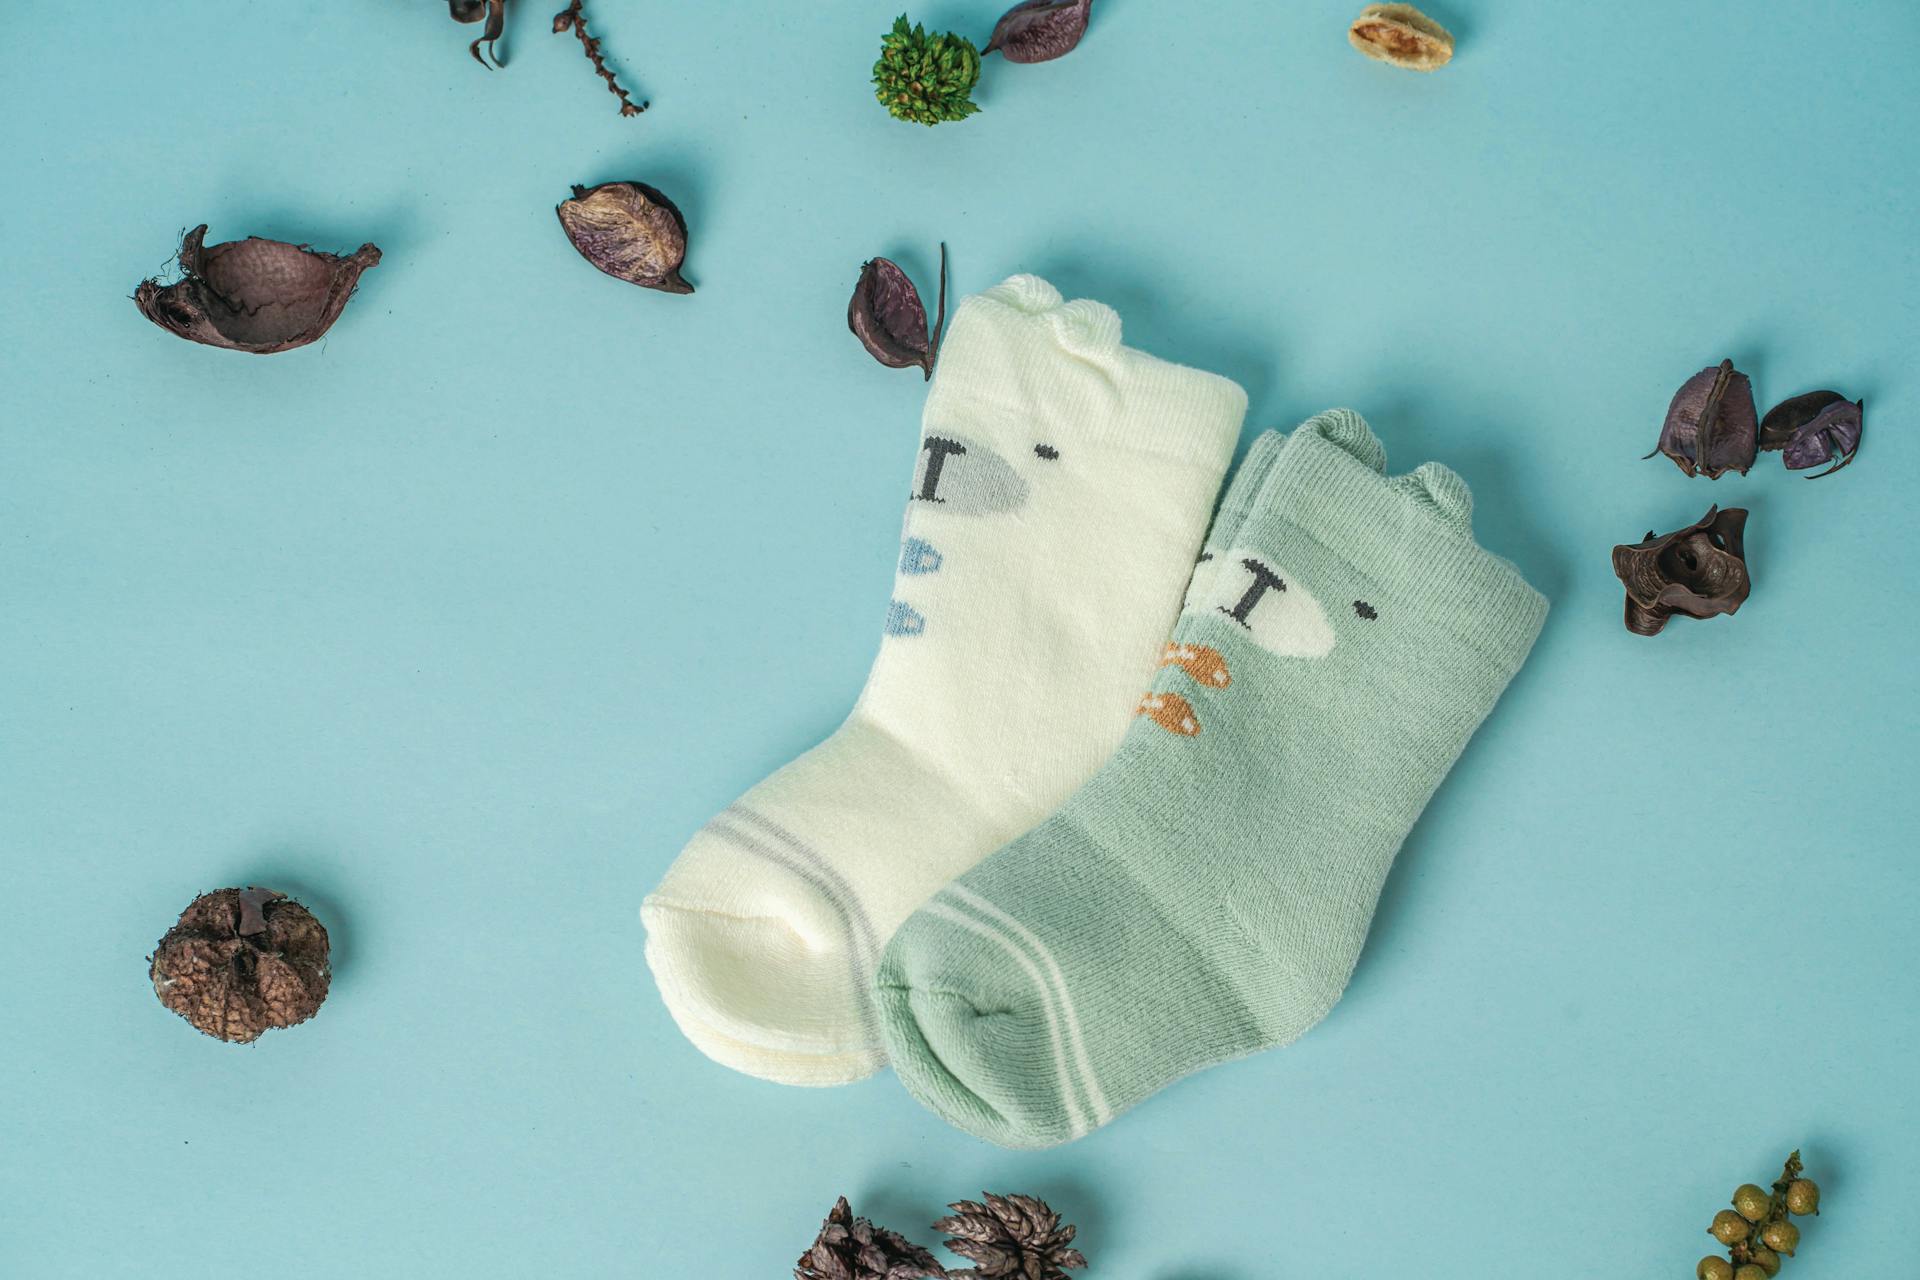 A close-up shot of baby socks lying on a blue surface | Source: Pexels